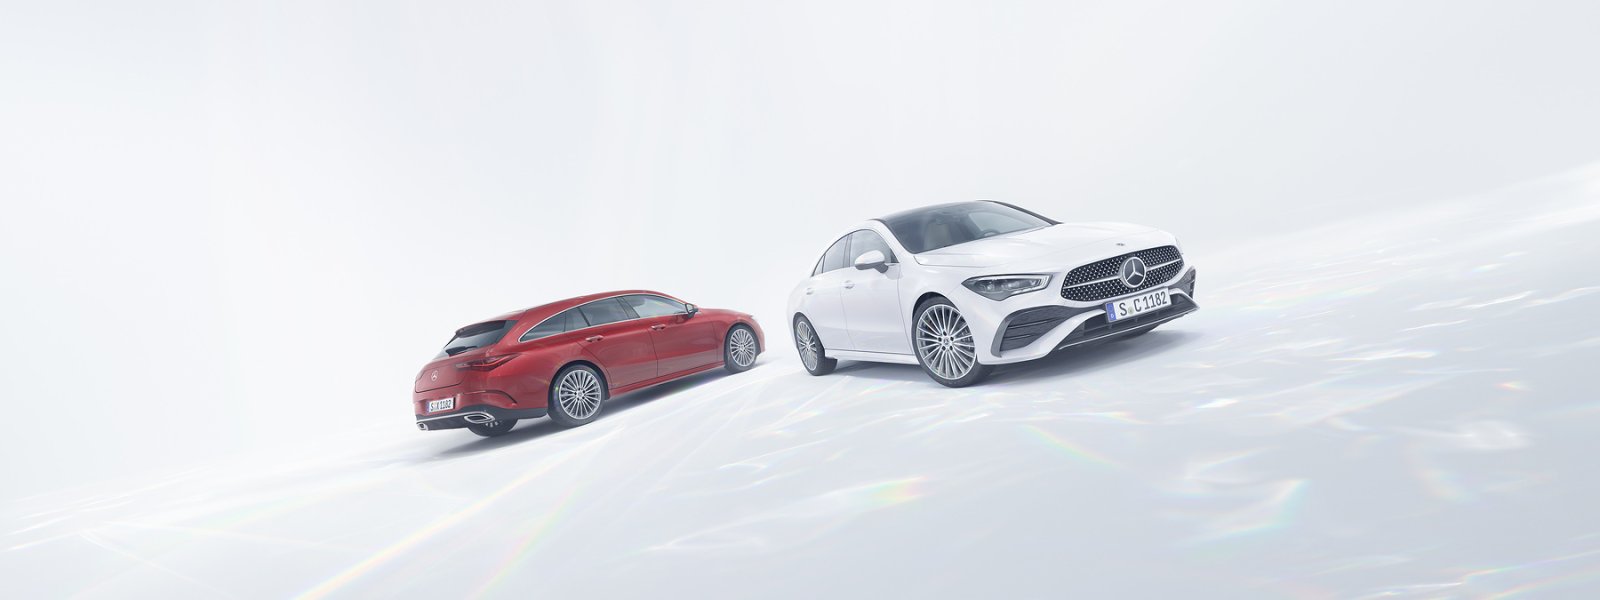 Mercedes-Benz To Discontinue Station Wagon, Coupe & SUV Coupe